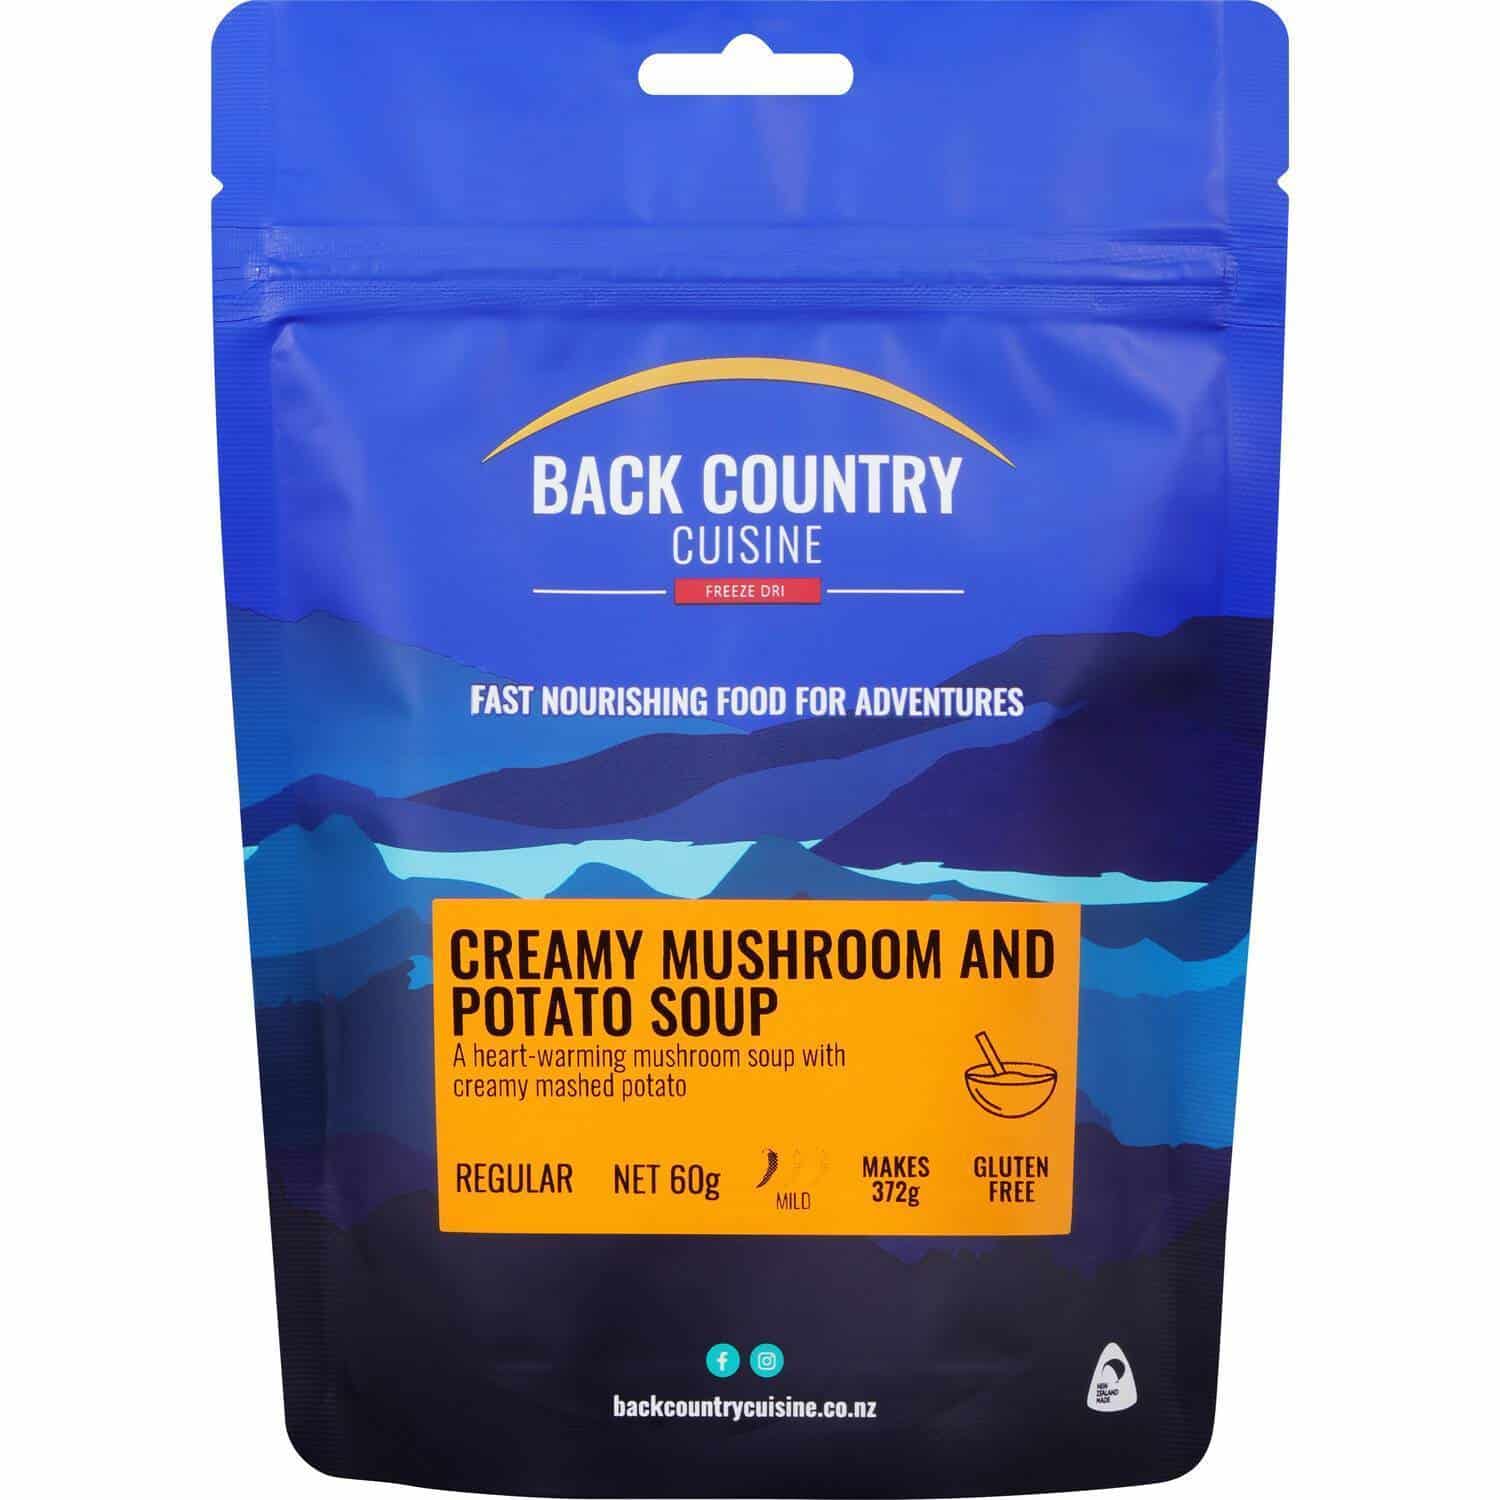 Back Country Cuisine Creamy Mushroom & Potato Soup - Tramping Food and Accessories sold by Venture Outdoors NZ